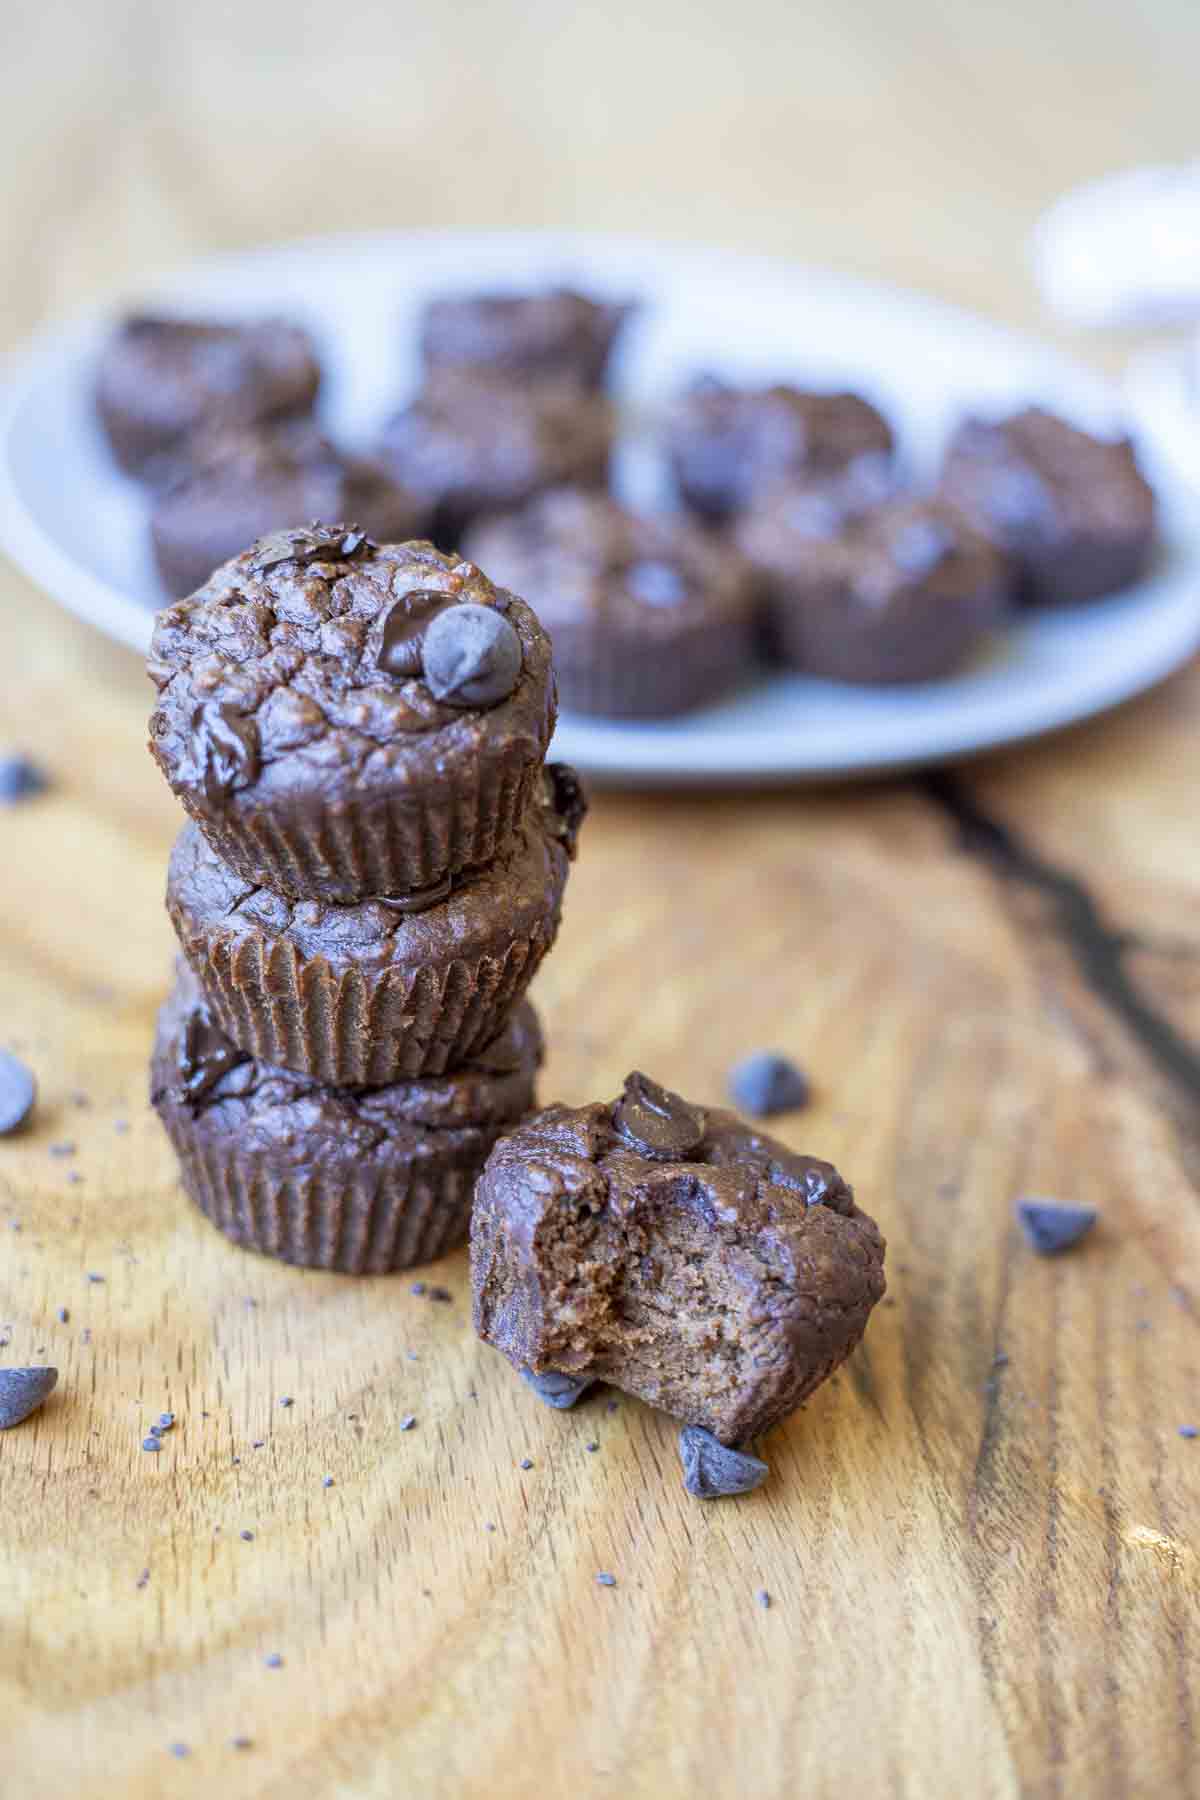 three healthy chocolate muffins stacked up. A fourth muffin is to the right with a bite out. Chocolate chips surround the muffins and there is another pate of muffins in the background